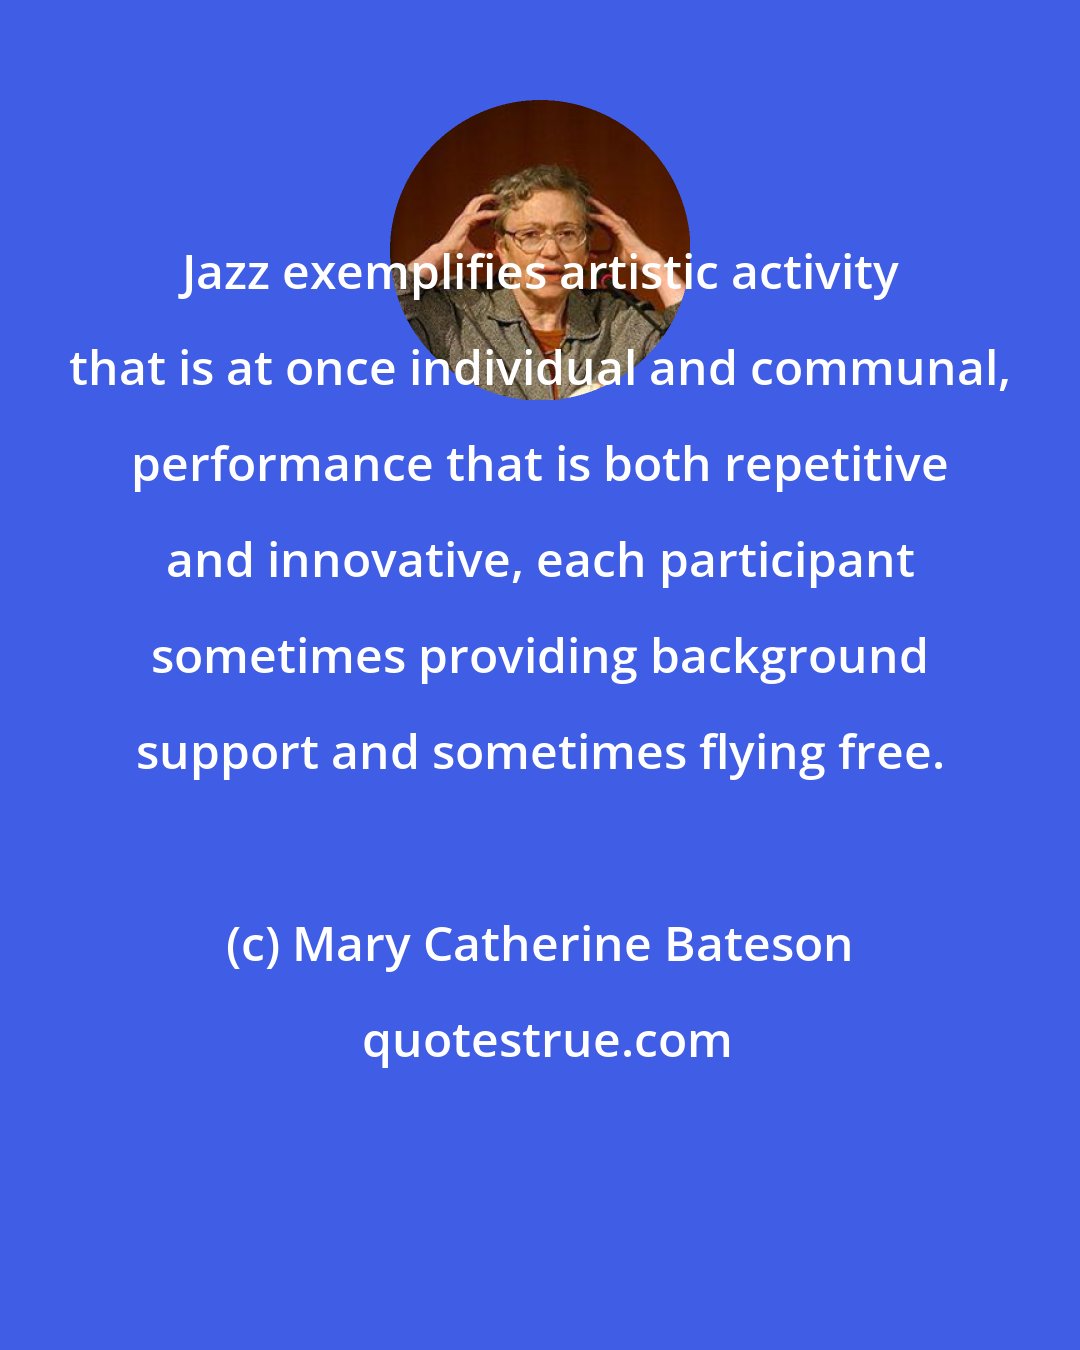 Mary Catherine Bateson: Jazz exemplifies artistic activity that is at once individual and communal, performance that is both repetitive and innovative, each participant sometimes providing background support and sometimes flying free.